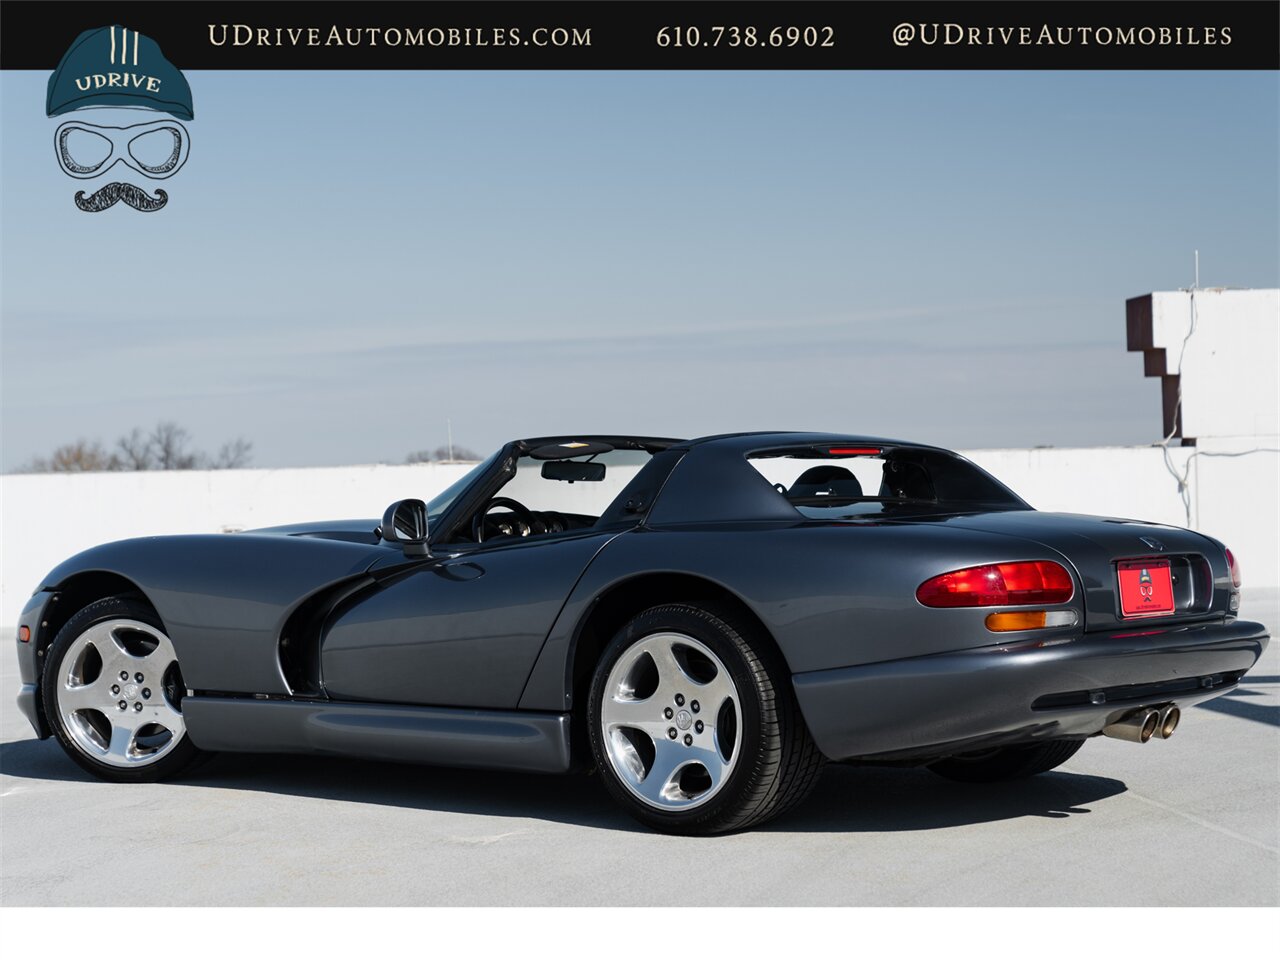 2000 Dodge Viper RT/10 Roadster  20k Miles - Photo 4 - West Chester, PA 19382